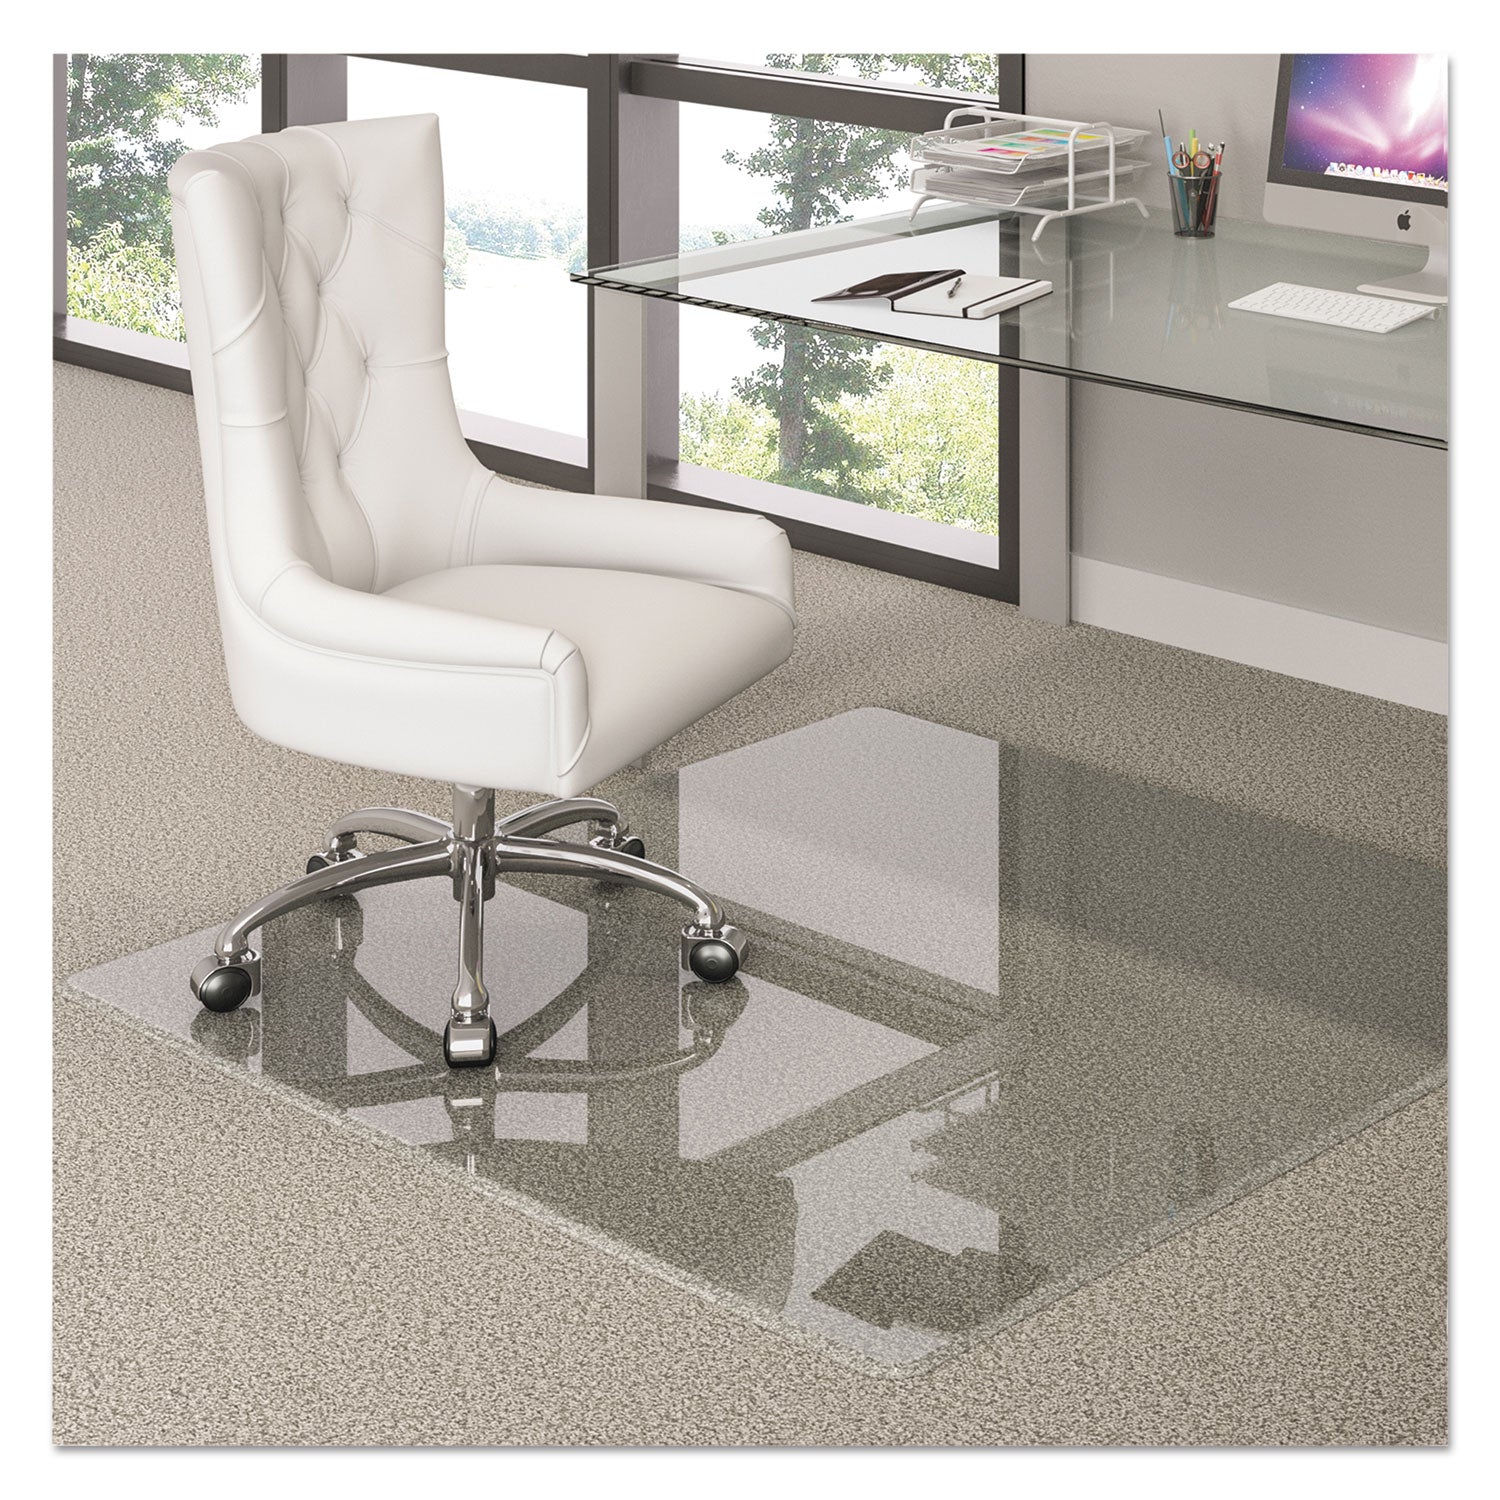 premium-glass-all-day-use-chair-mat--all-floor-types-36-x-46-rectangular-clear_defcmg70433646 - 1